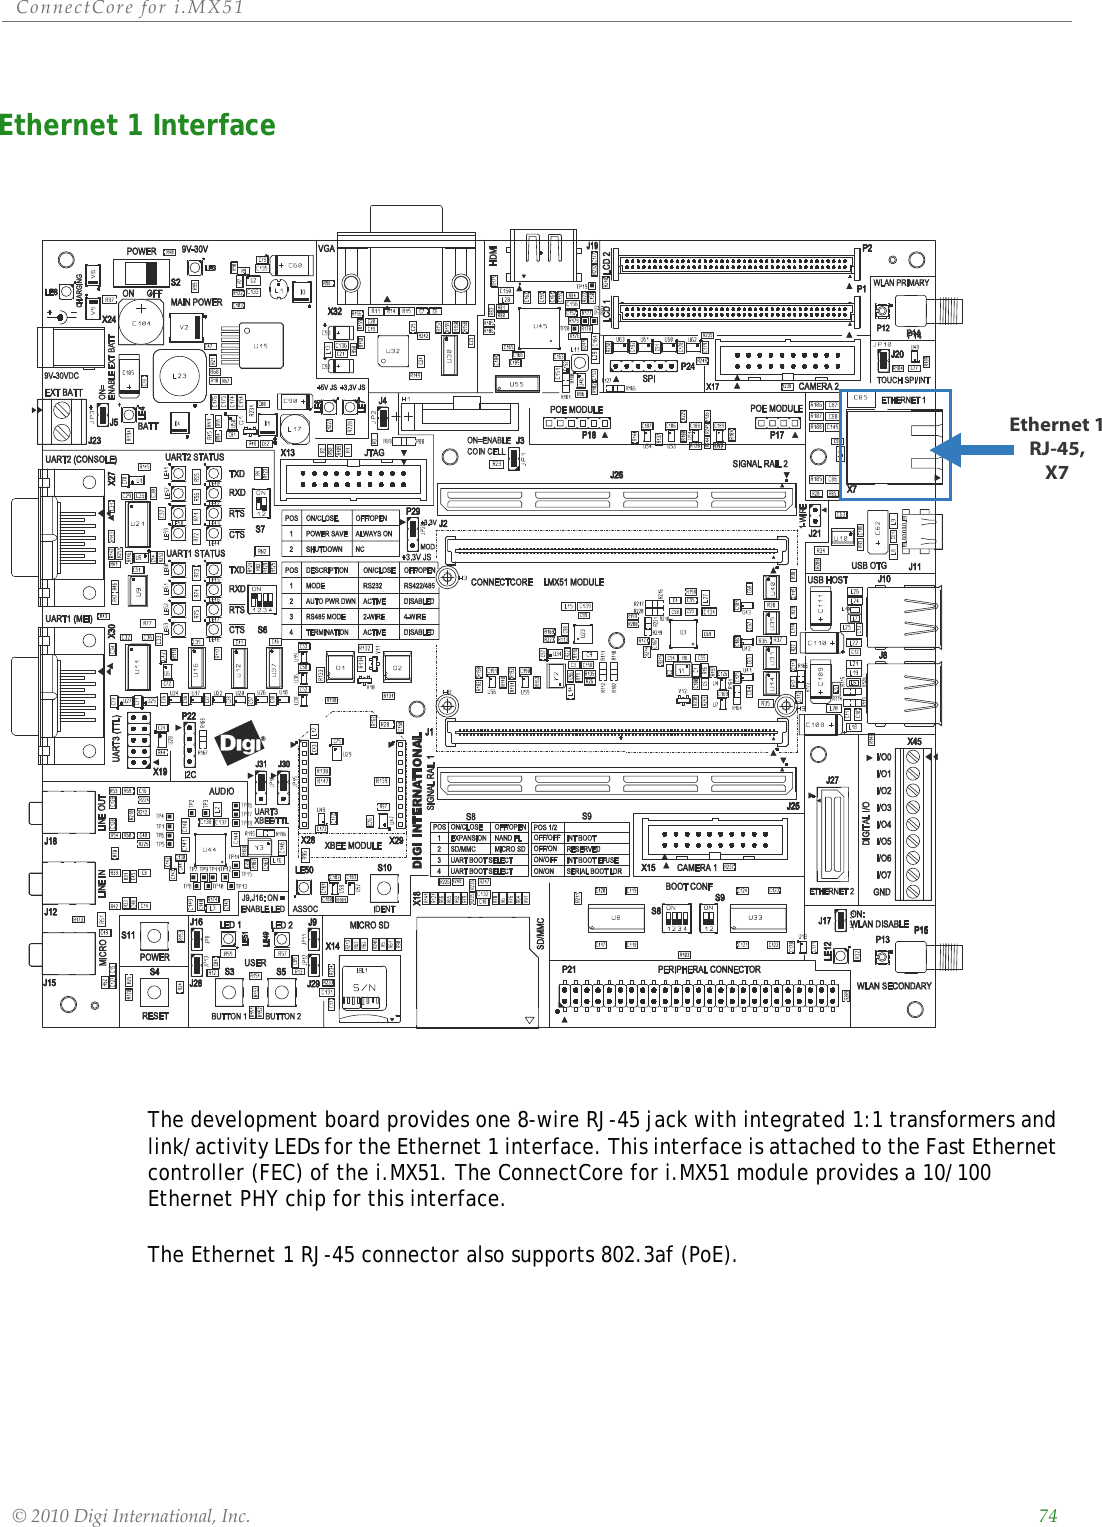 ConnectCorefori.MX51©2010DigiInternational,Inc. 74Ethernet 1 Interface The development board provides one 8-wire RJ-45 jack with integrated 1:1 transformers and link/activity LEDs for the Ethernet 1 interface. This interface is attached to the Fast Ethernet controller (FEC) of the i.MX51. The ConnectCore for i.MX51 module provides a 10/100 Ethernet PHY chip for this interface.The Ethernet 1 RJ-45 connector also supports 802.3af (PoE).Ethernet 1RJ-45,X7